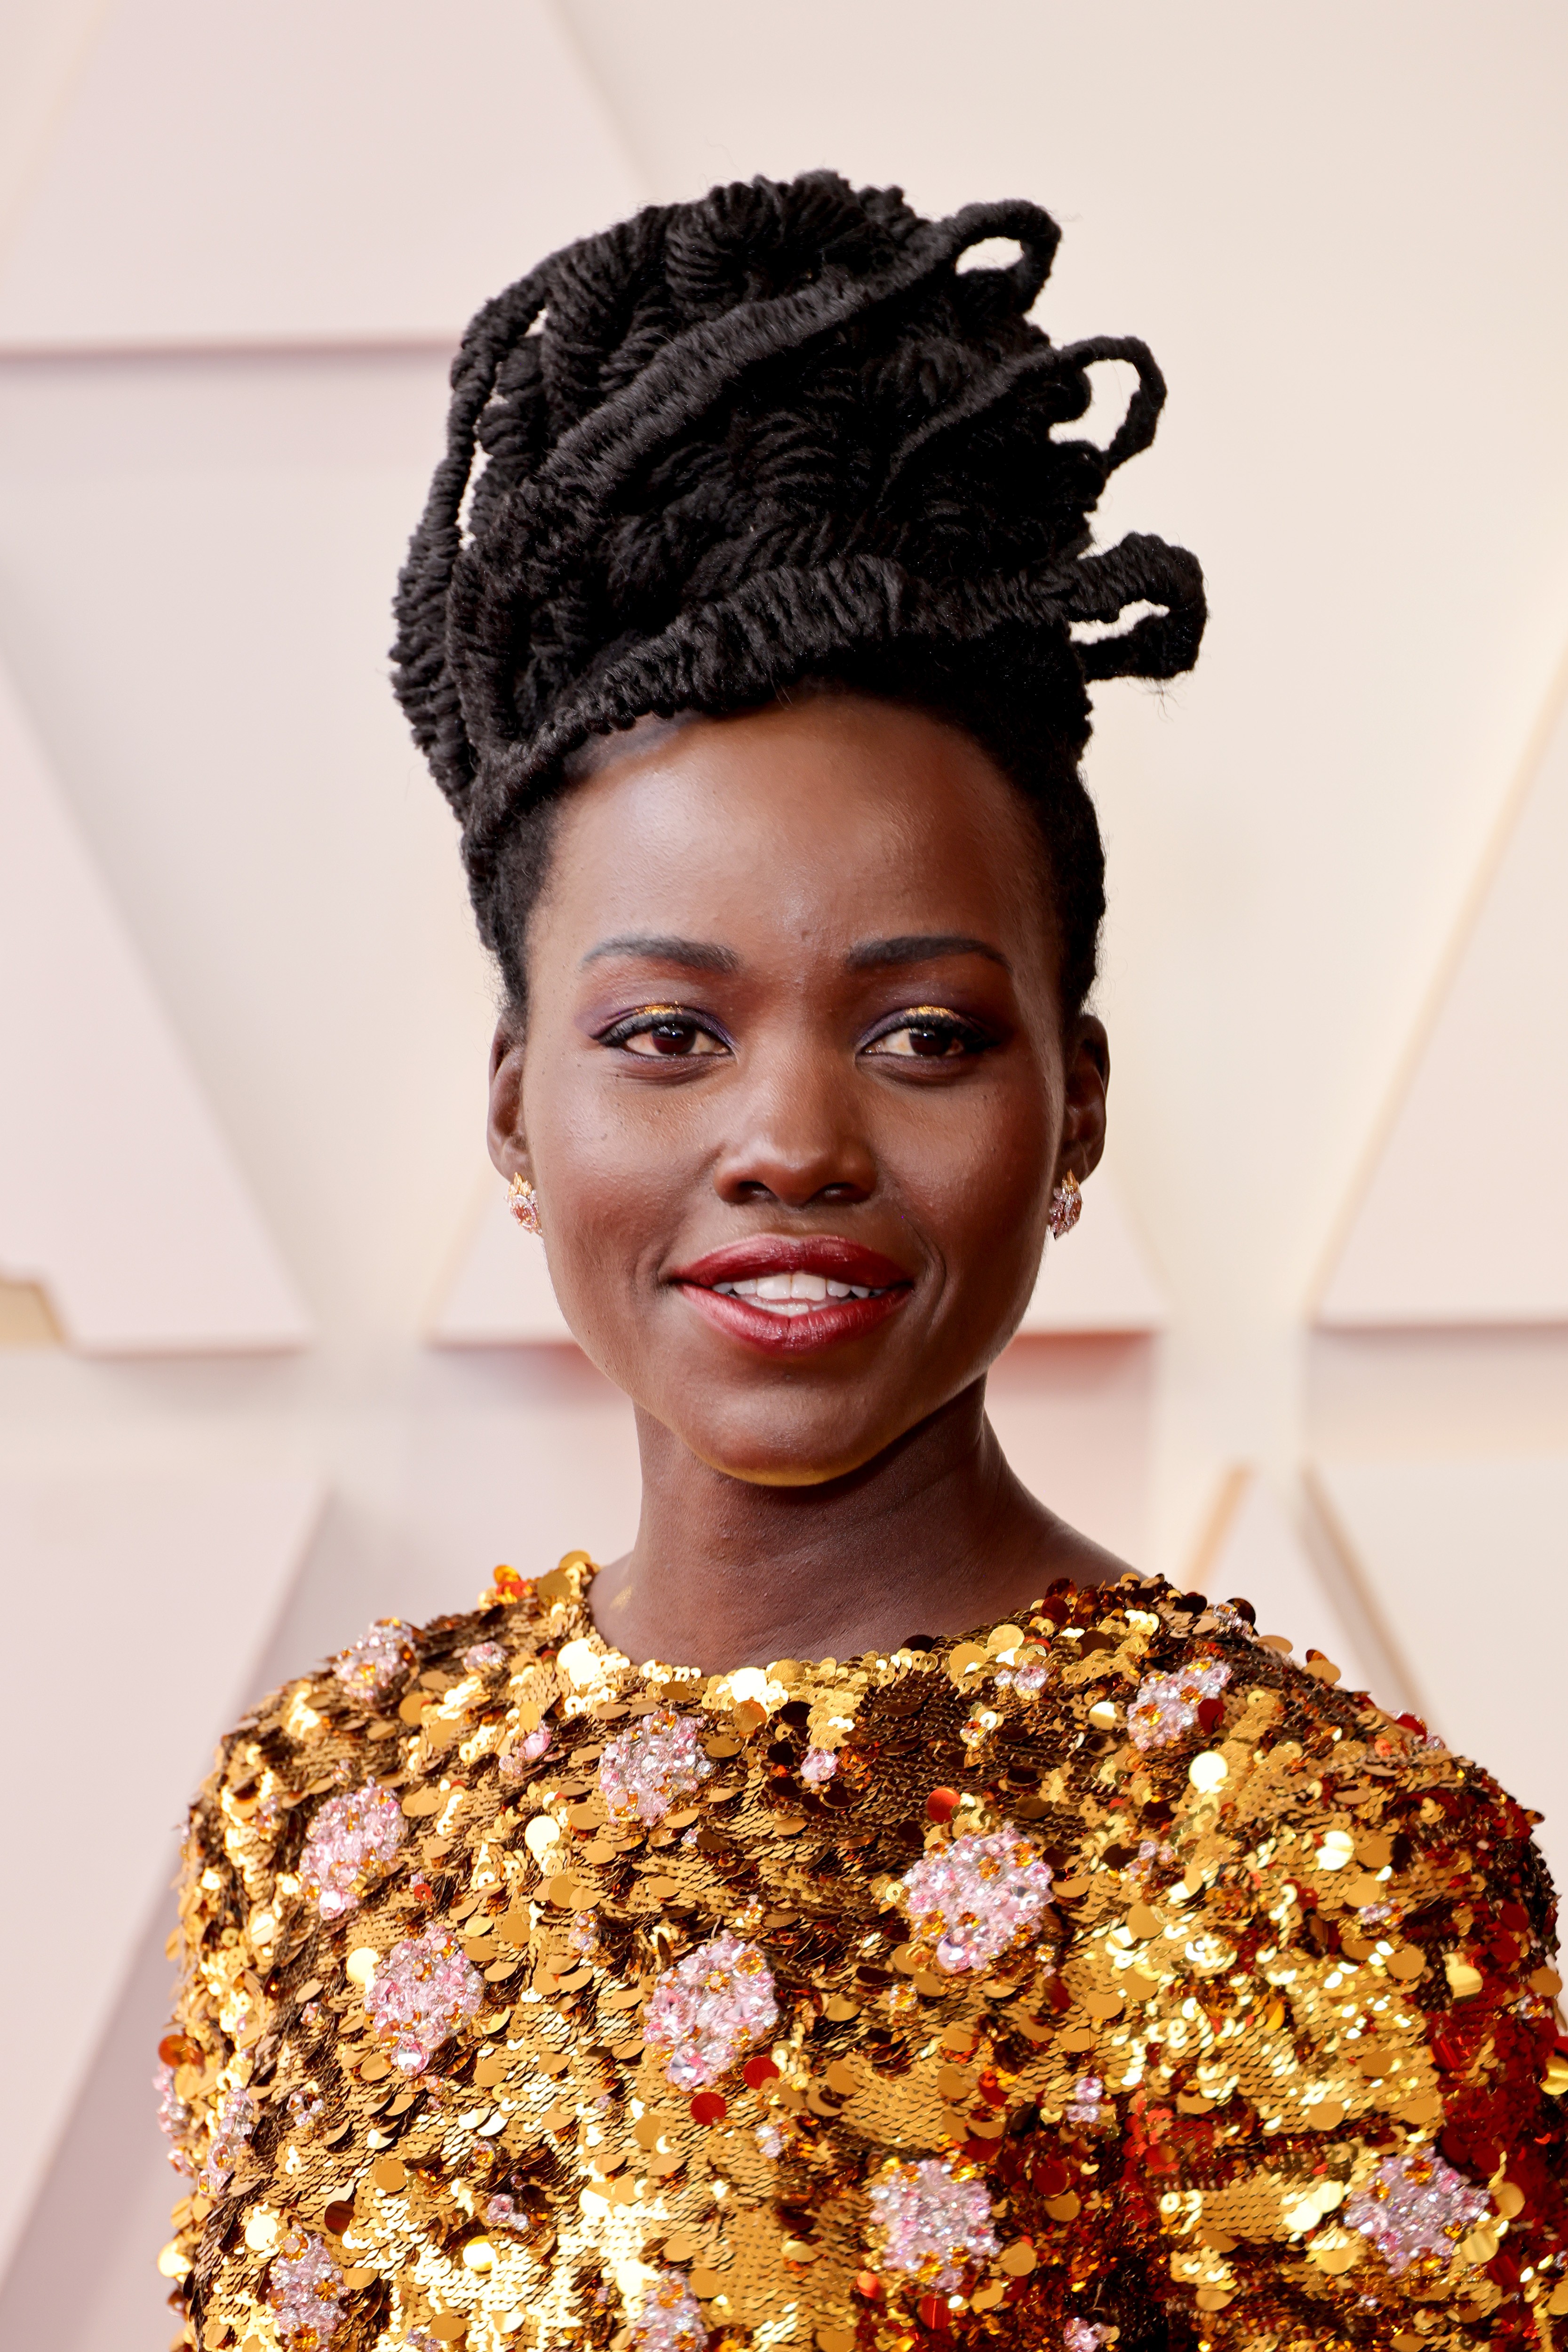 HOLLYWOOD, CALIFORNIA - MARCH 27: Lupita Nyong'o attends the 94th Annual Academy Awards at Hollywood and Highland on March 27, 2022 in Hollywood, California. (Photo by Momodu Mansaray/Getty Images) (Foto: Getty Images)